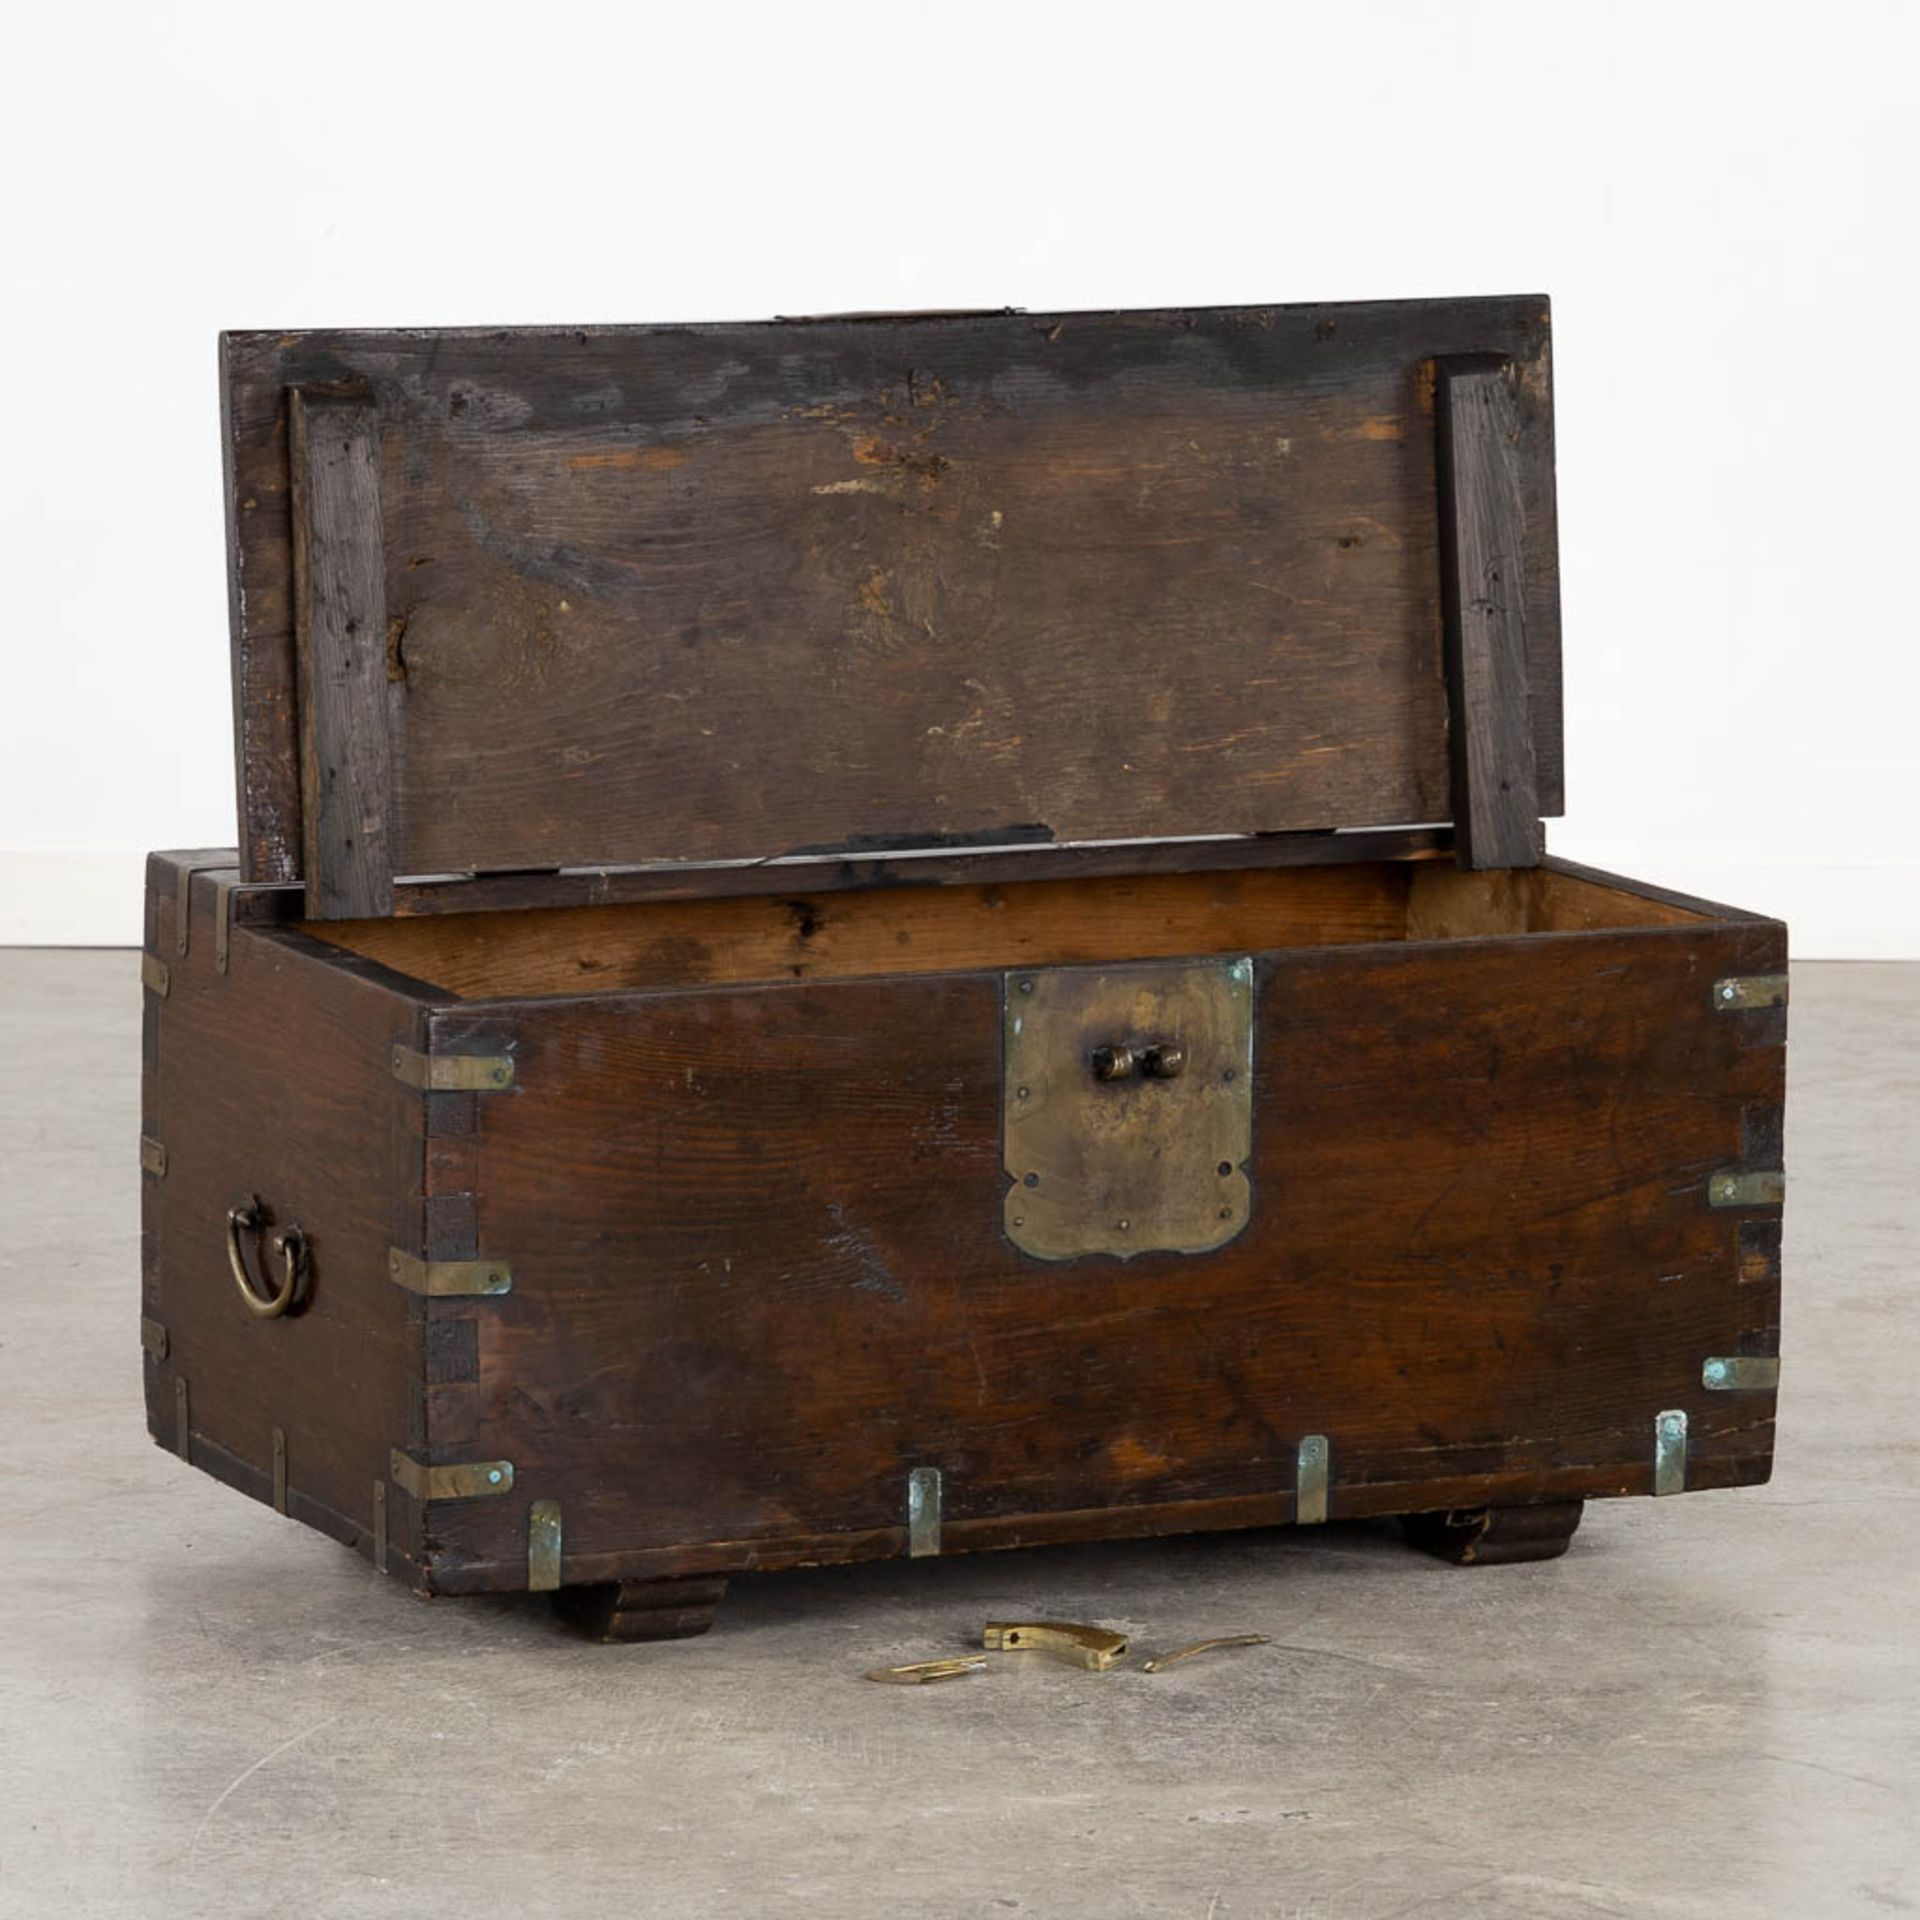 An antique Oriental chest with brass hardware. (L:43 x W:76 x H:40 cm) - Image 3 of 13